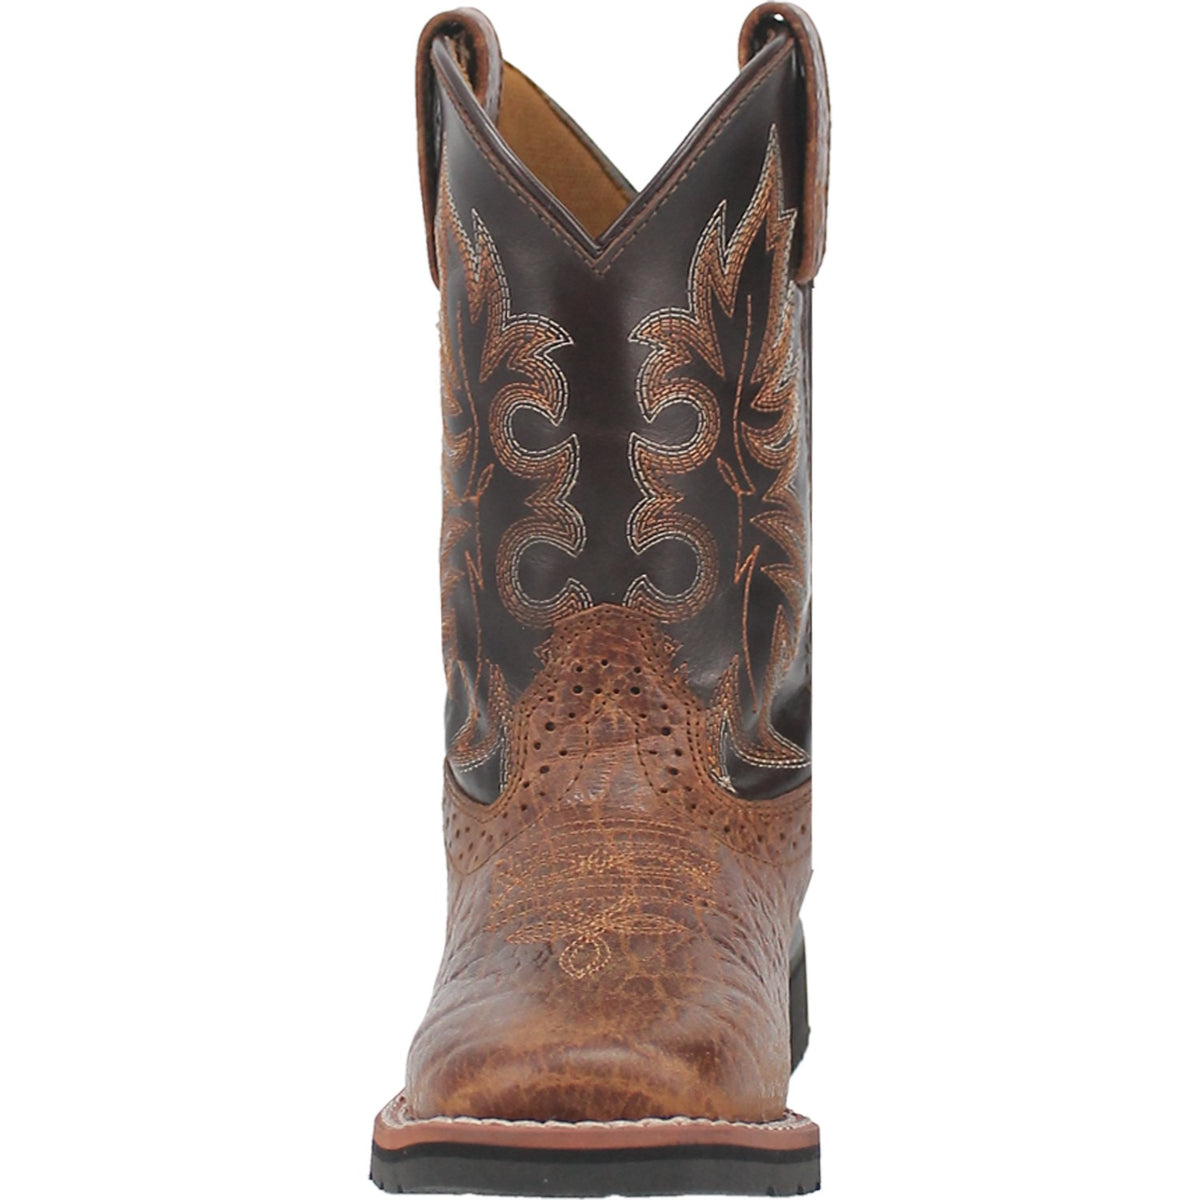 LIL' BROKEN BOW LEATHER YOUTH BOOT Cover